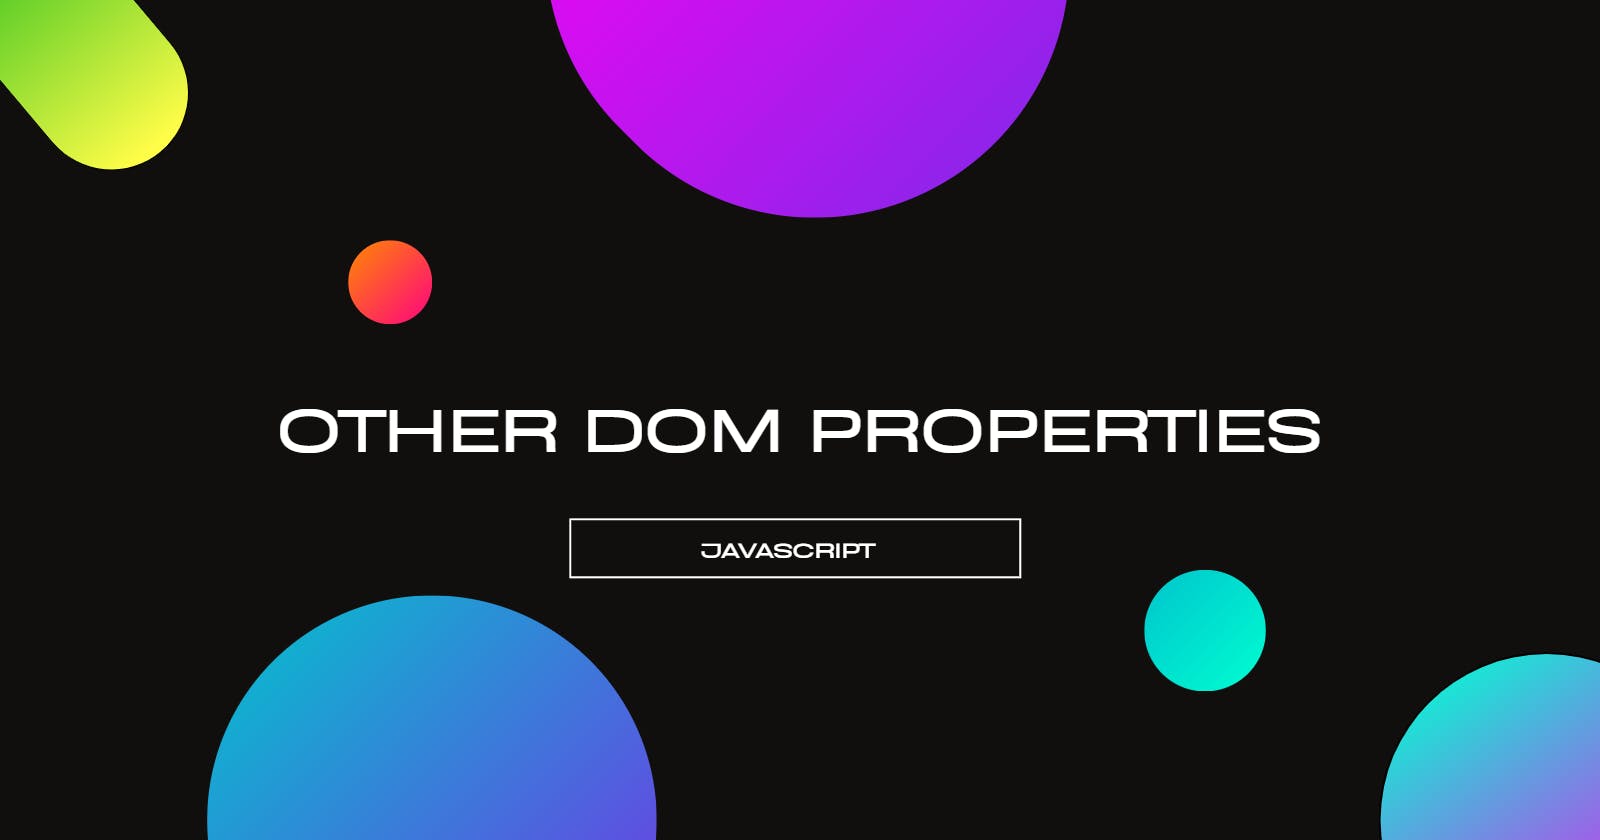 Other DOM Properties